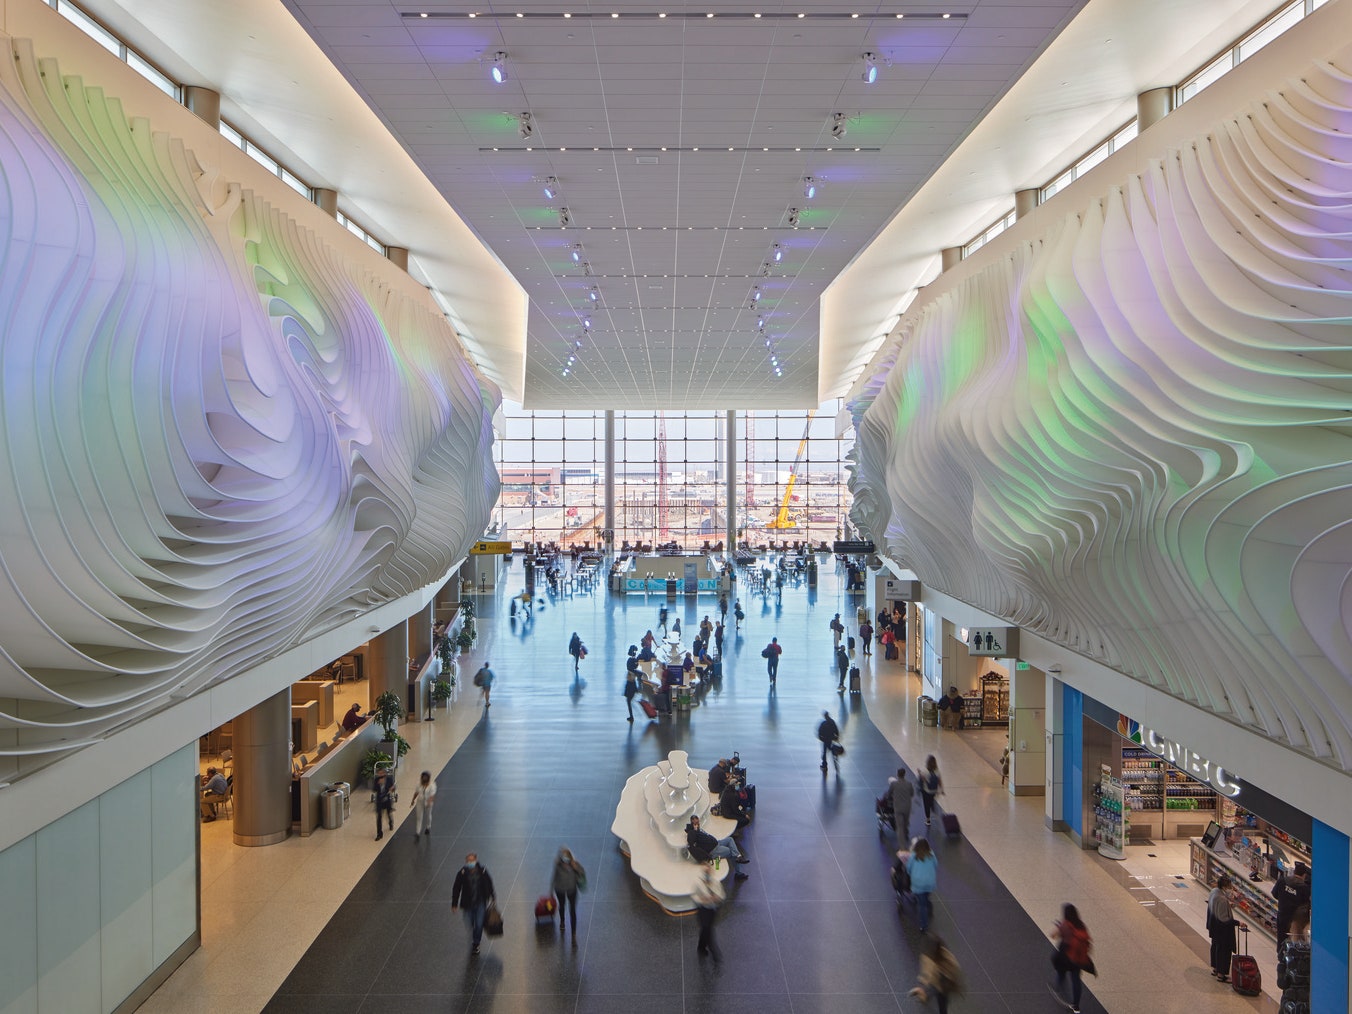 Salt Lake City’s New Airport Is Art-Filled, Multi-Sensorial, and Designed for the Future